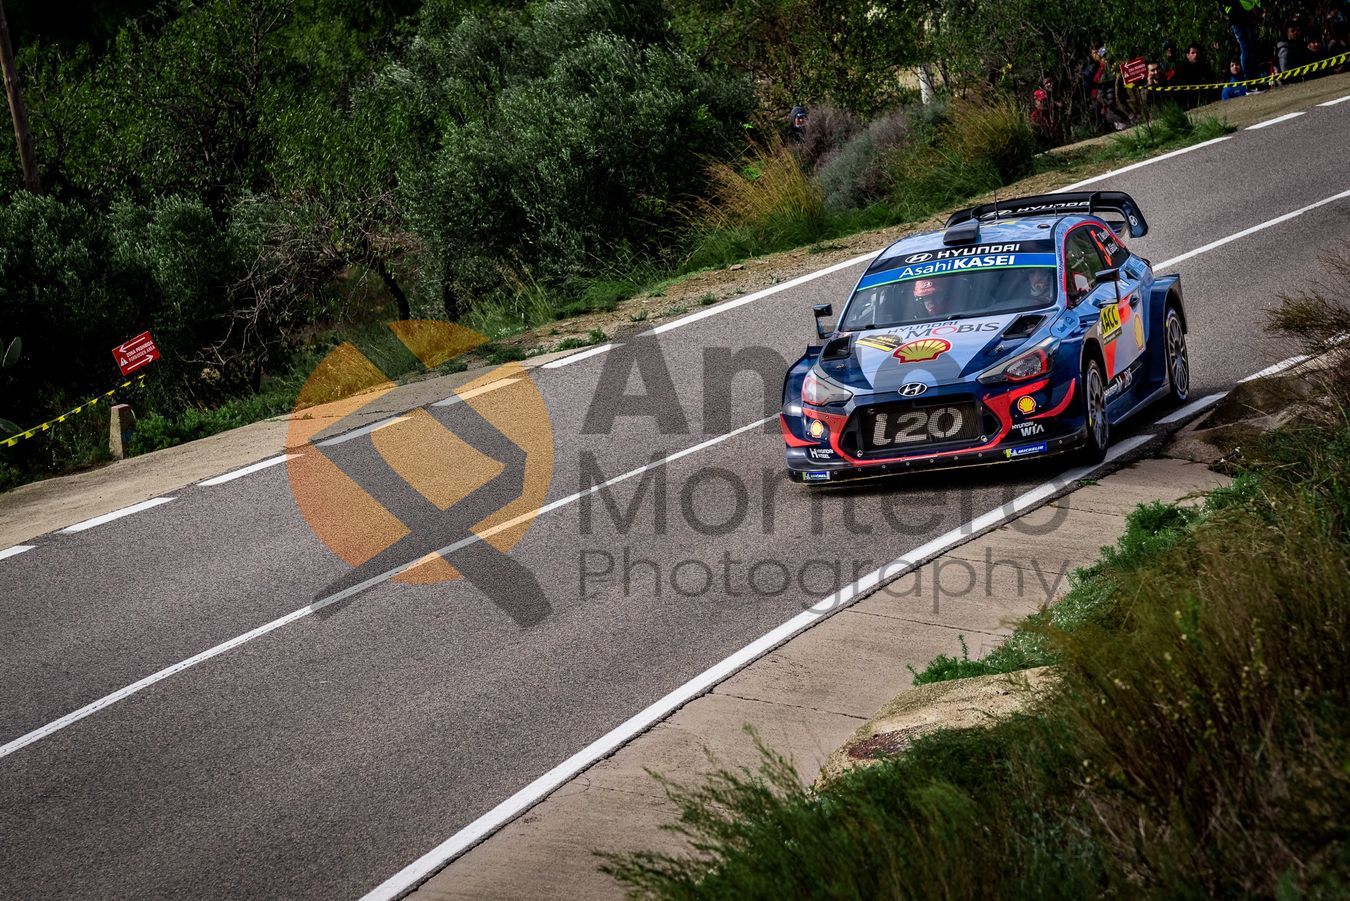 5.Thierry Neuville SS17 Riudecanyes